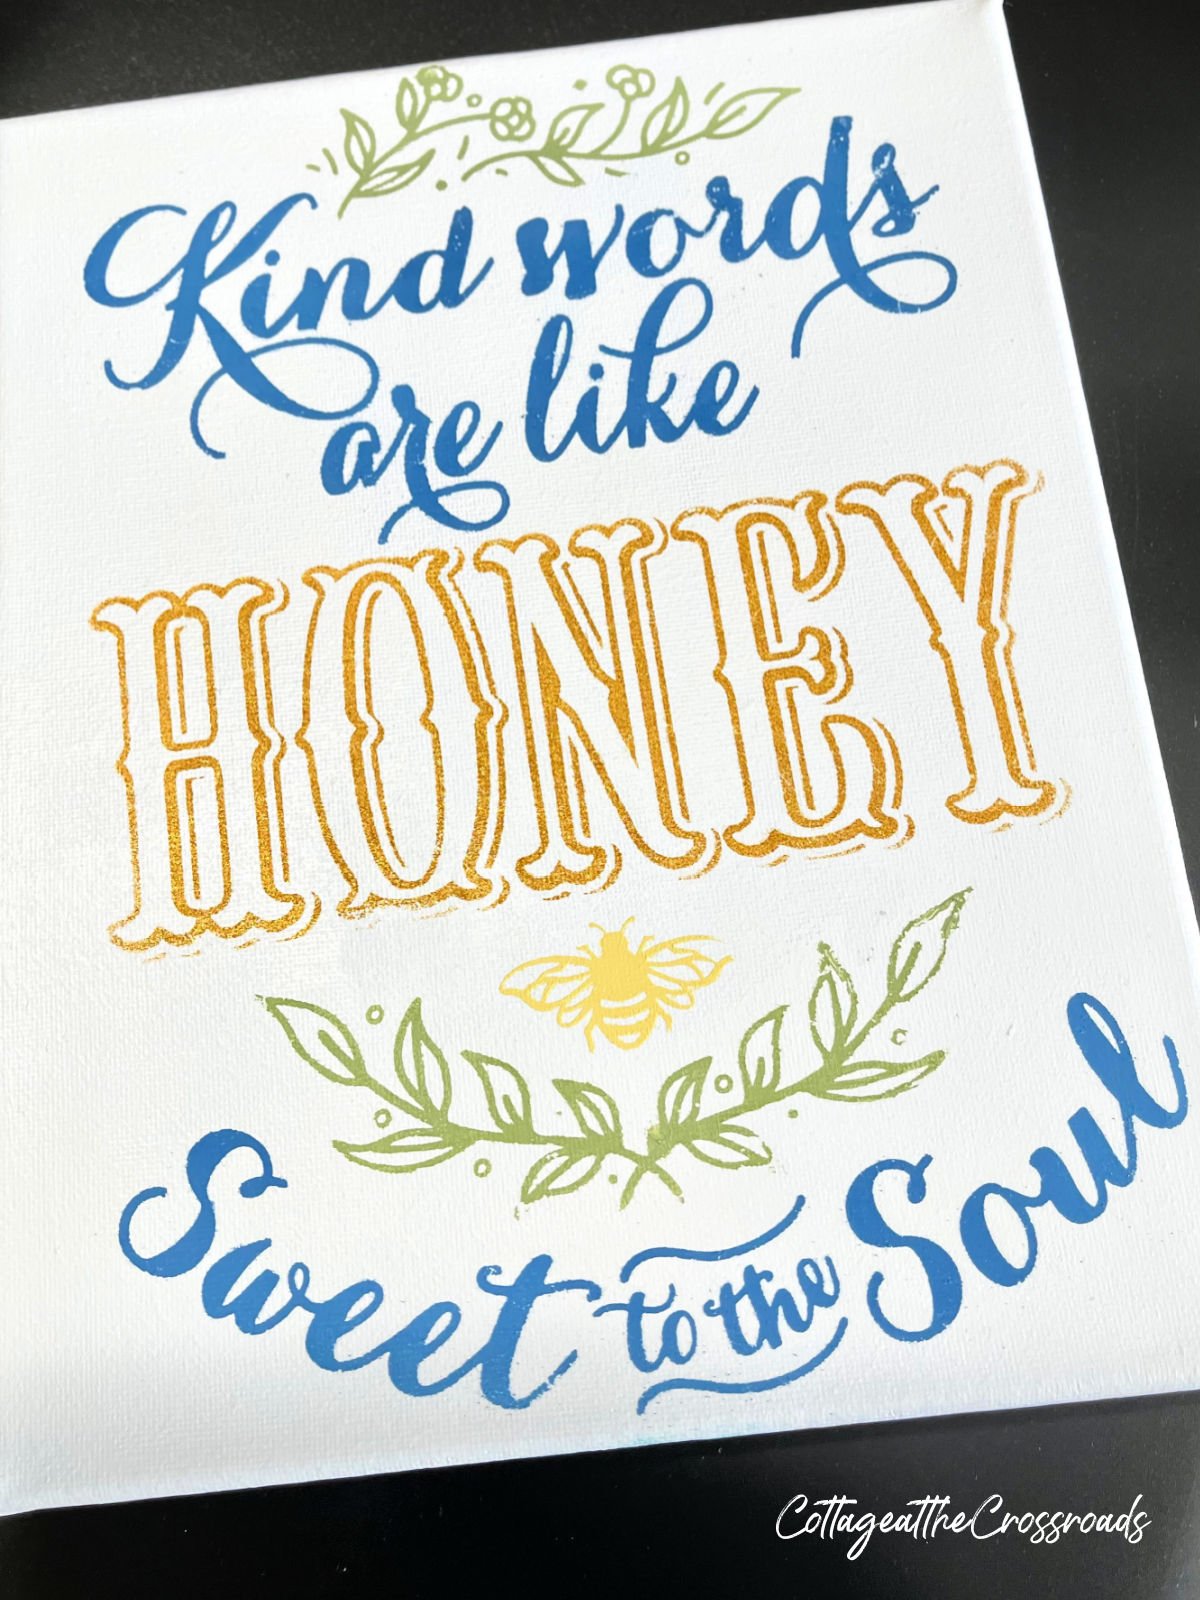 Sign that says kind words are like honey sweet to the soul